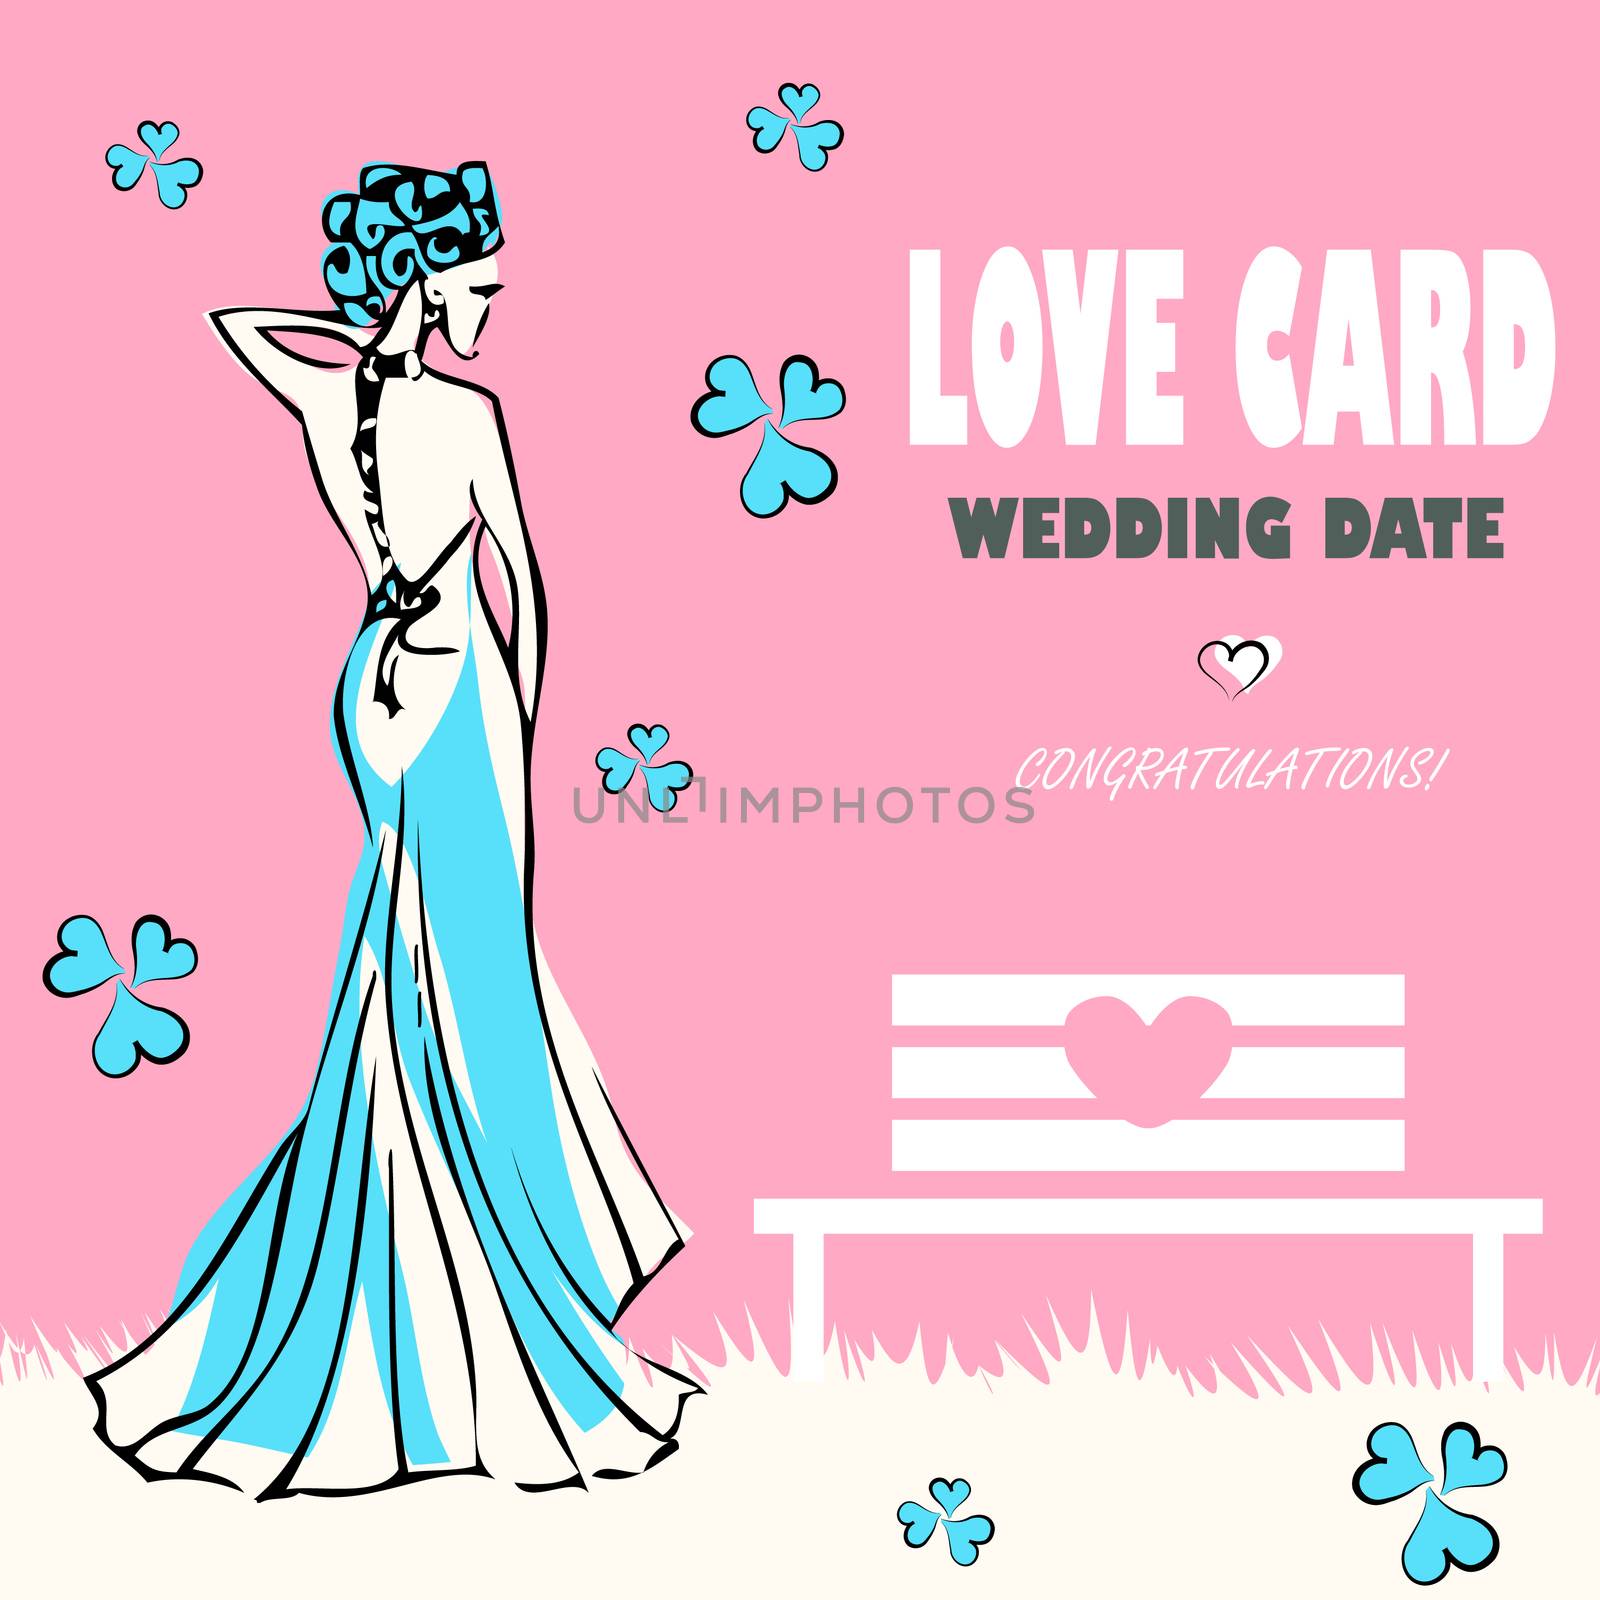 Wedding card, love nature, congratulations logo. Vector weddings by IconsJewelry